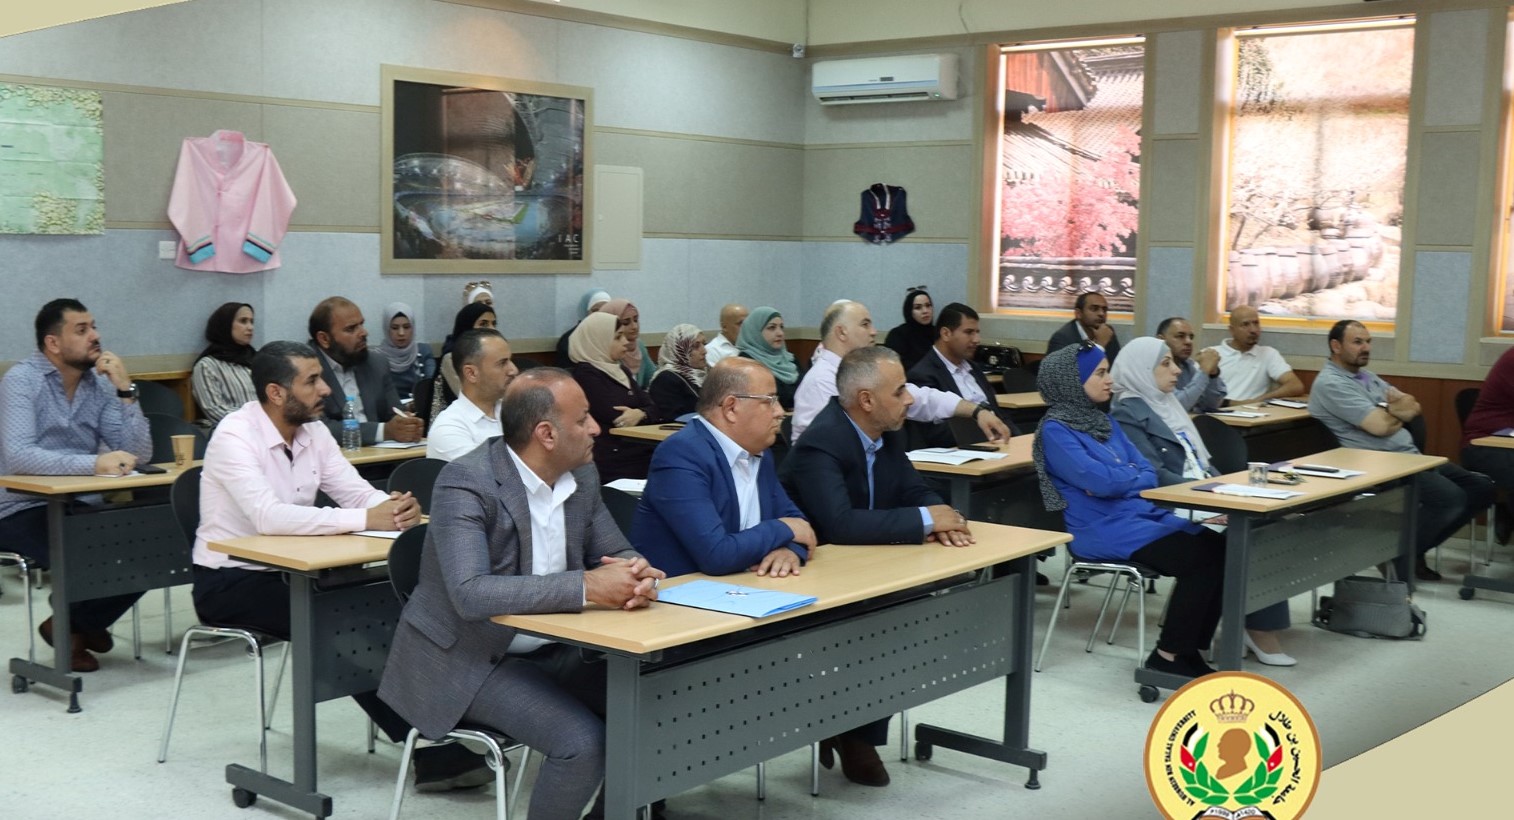 The President of Al-Hussein Bin Talal University inaugurates a session on institutionalizing procedures for the right to obtain information / archiving documents.